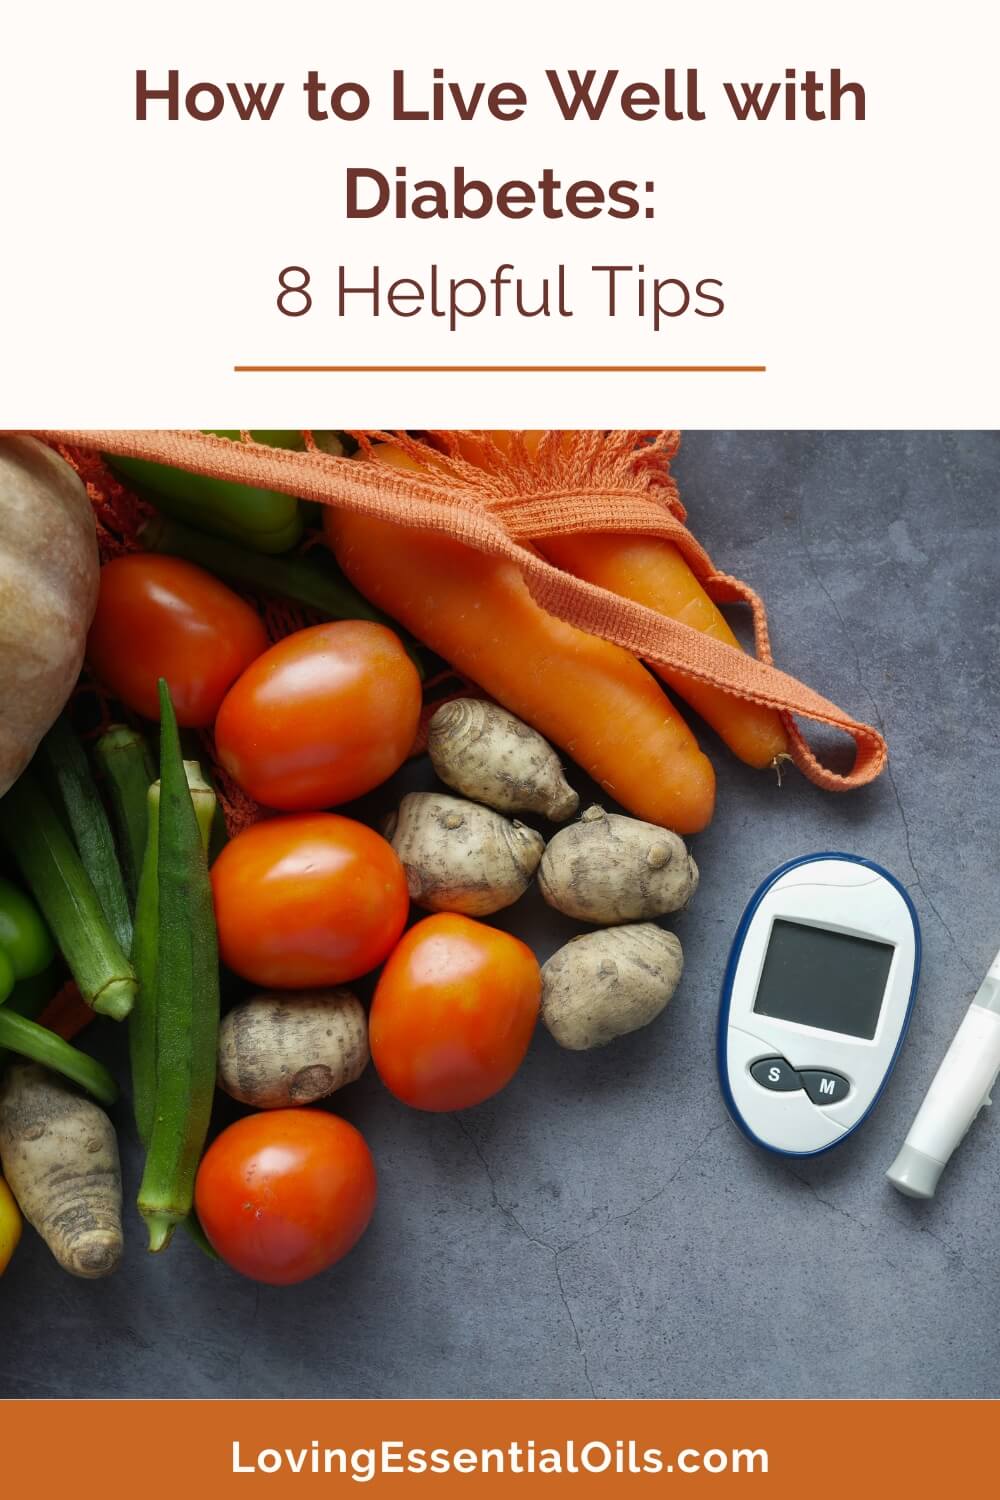 How to Live Well with Diabetes